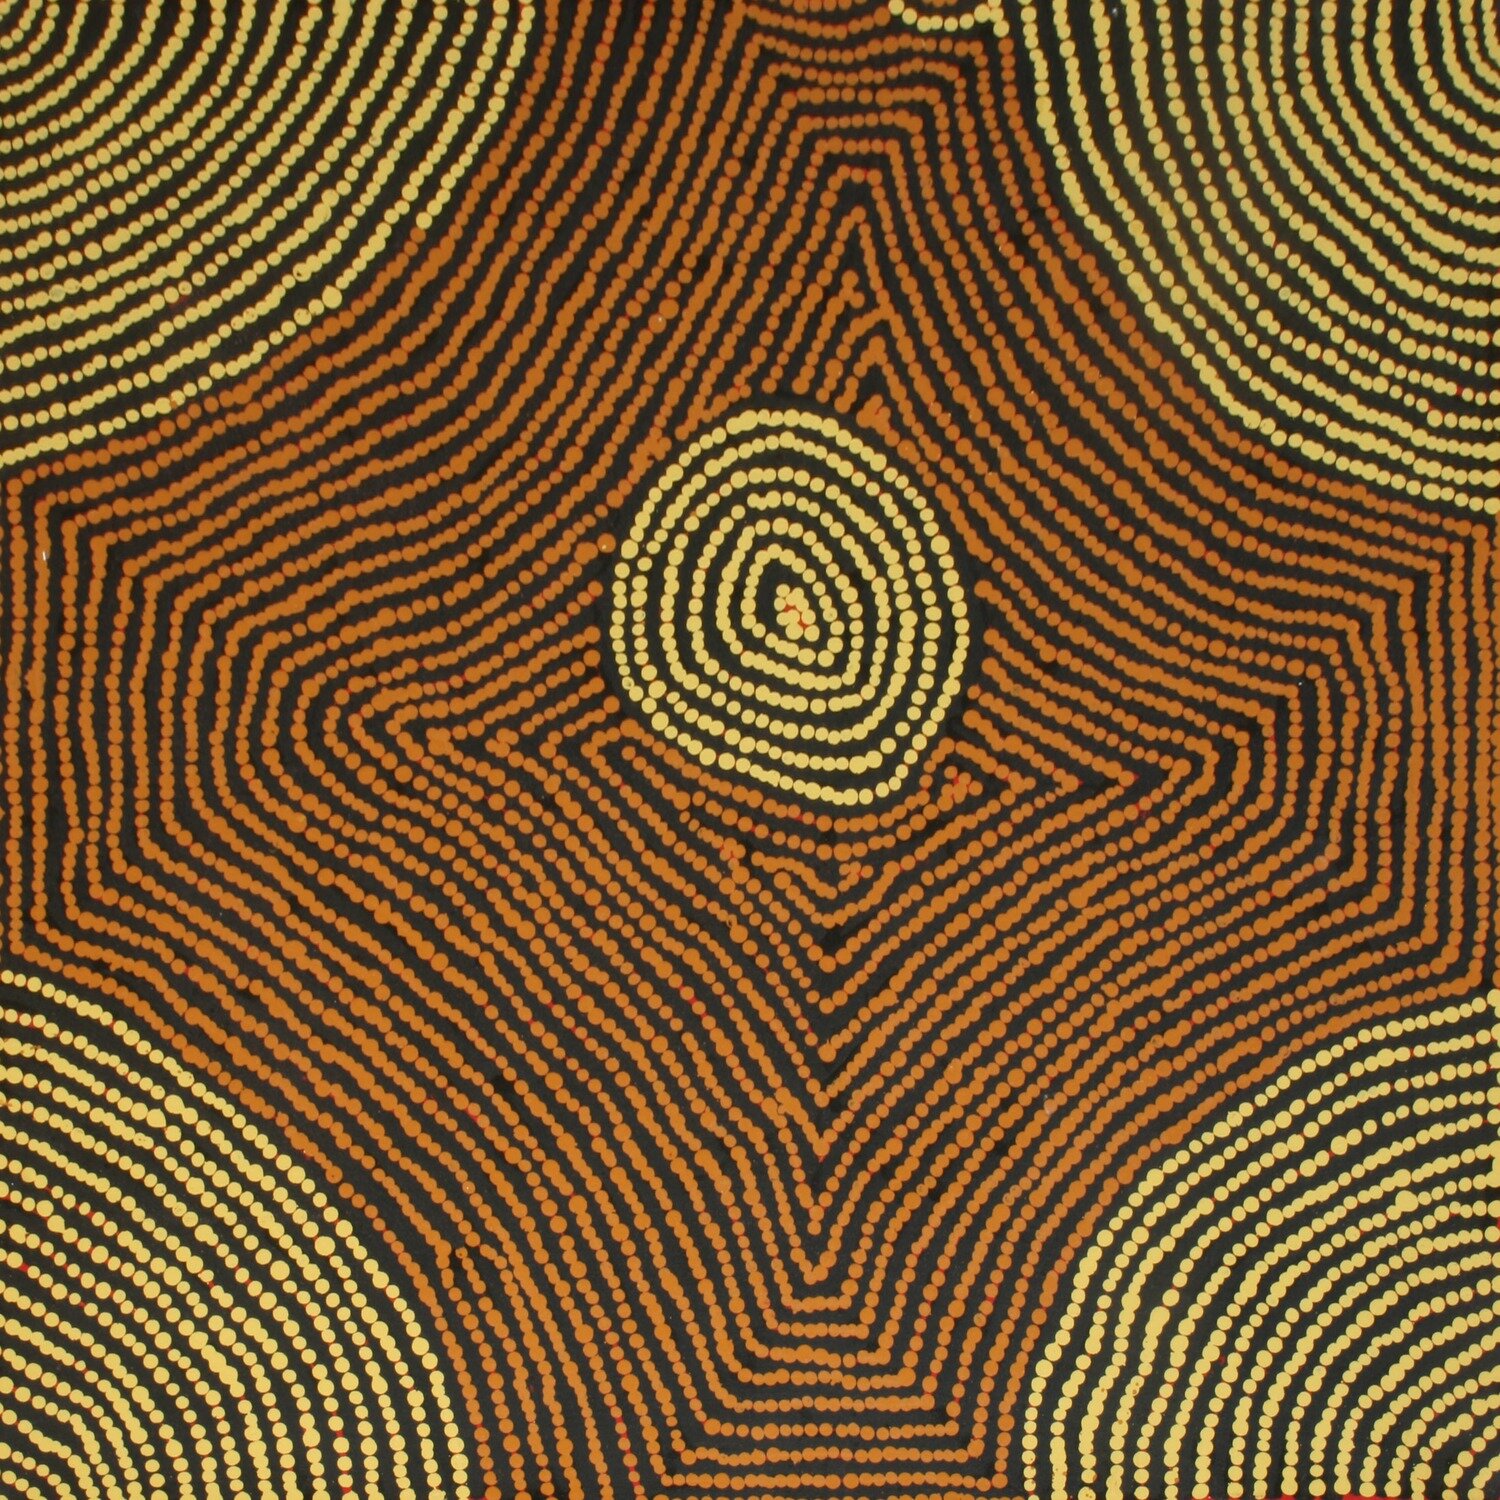 Tingari Cycle, 2005 by Barney Campbell Tjakamarra
91x91cm Cat 9378BC